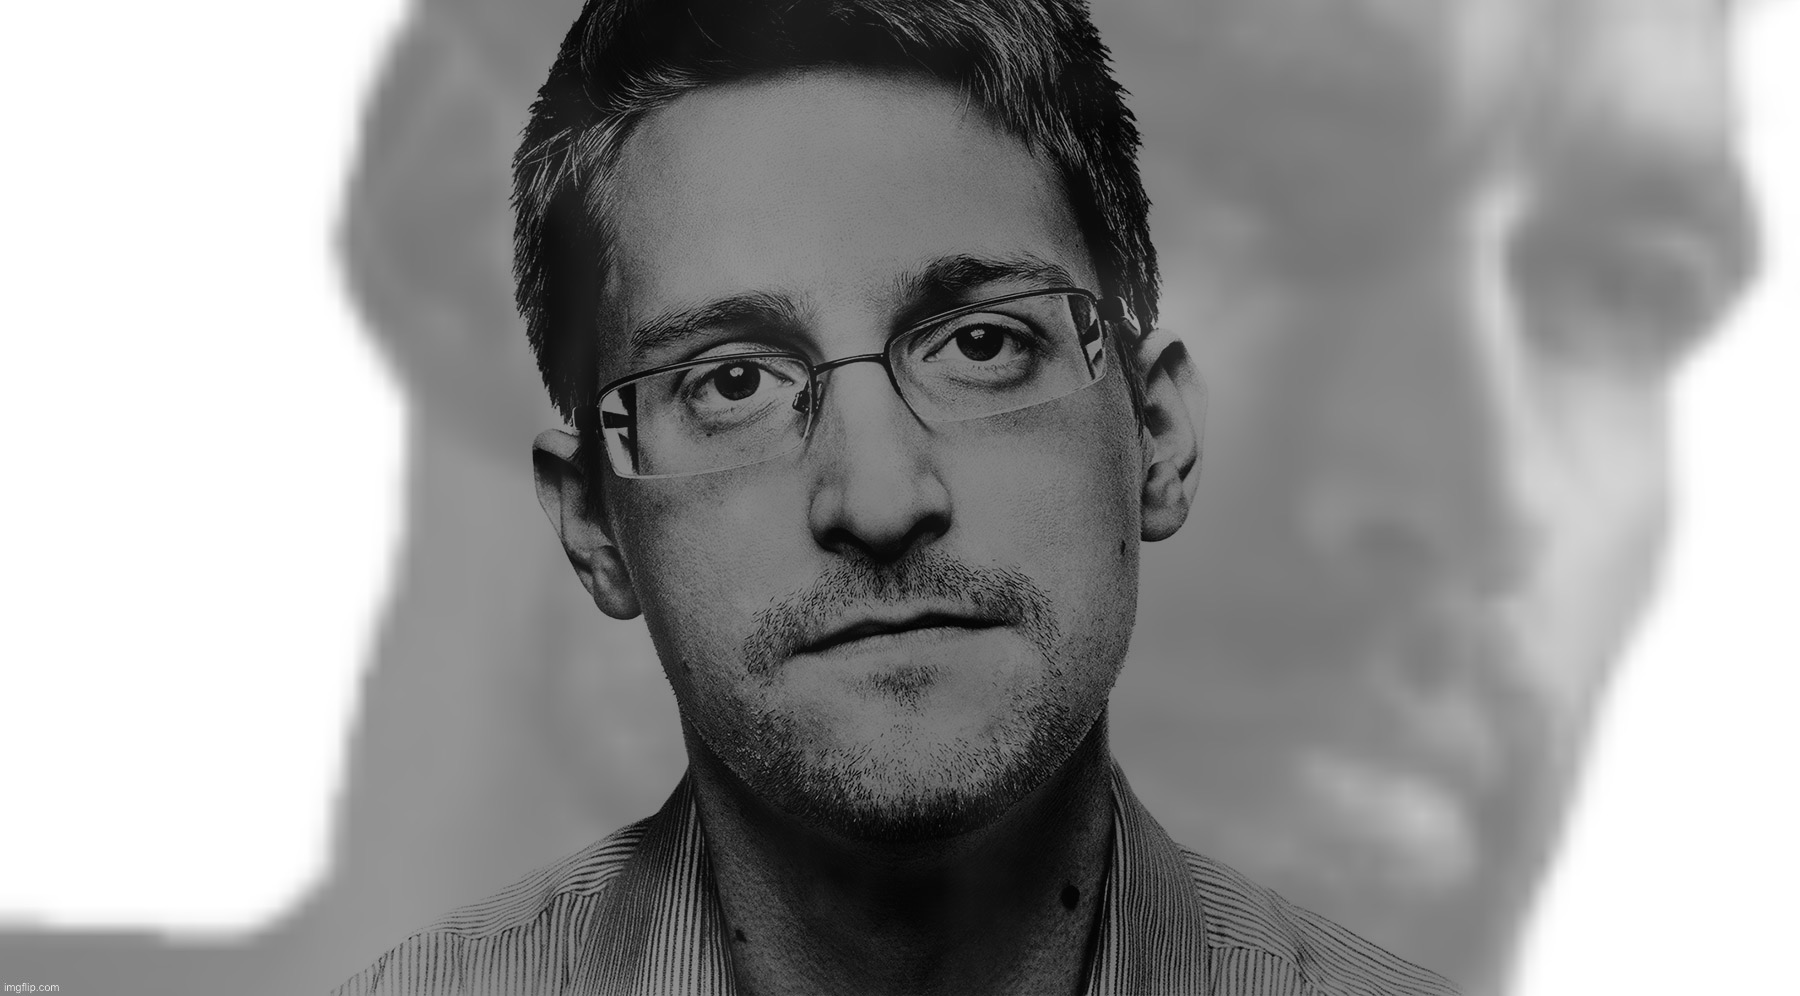 Giga Chad Confirmt | image tagged in edward snowden giga chad confirmed,edward snowden,giga chad,confirmed,giga,chad | made w/ Imgflip meme maker